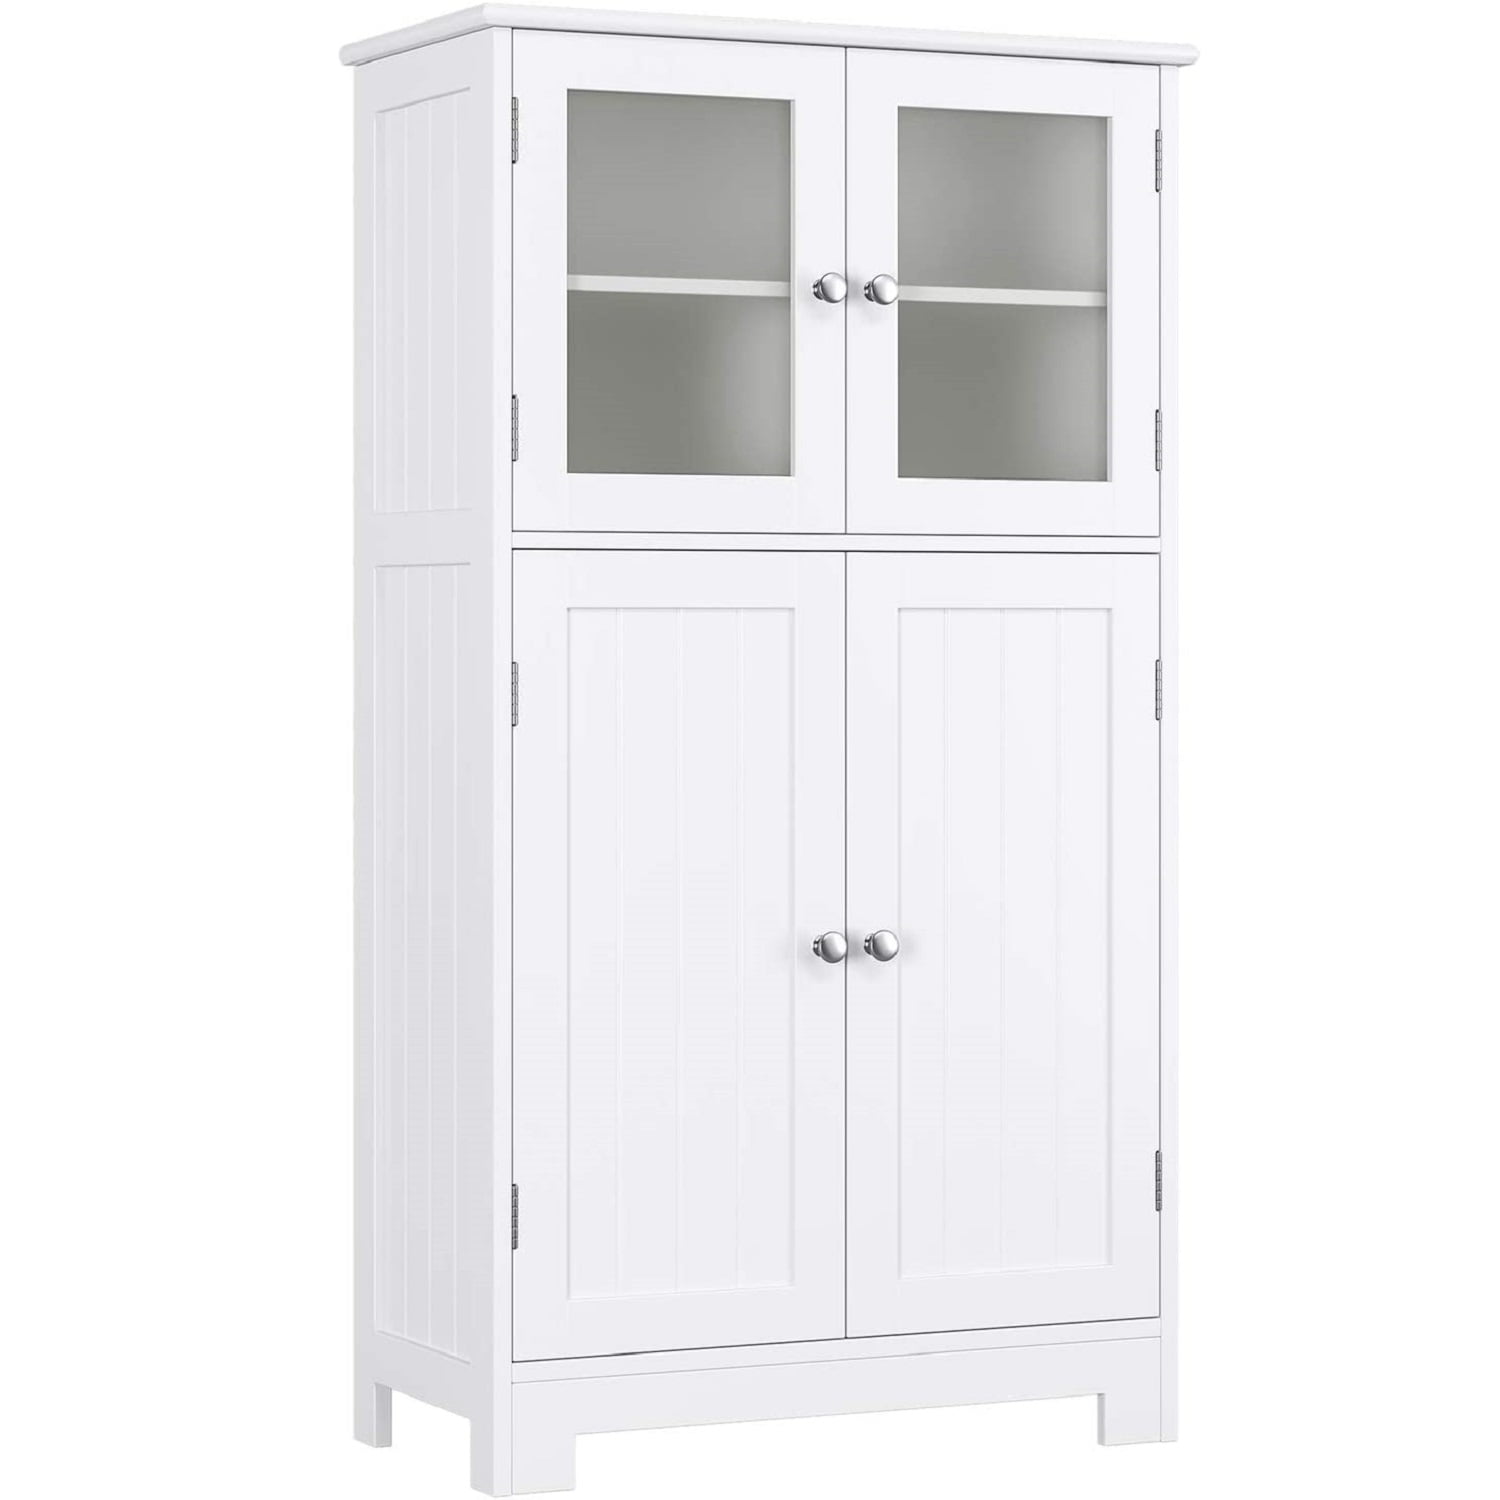 COSTWAY Bathroom Storage Cabinet White Drawer and Door Wooden Freestanding Tall Cupboard with Open Shelves Home Kitchen Living Room Hallway Organiser Unit 